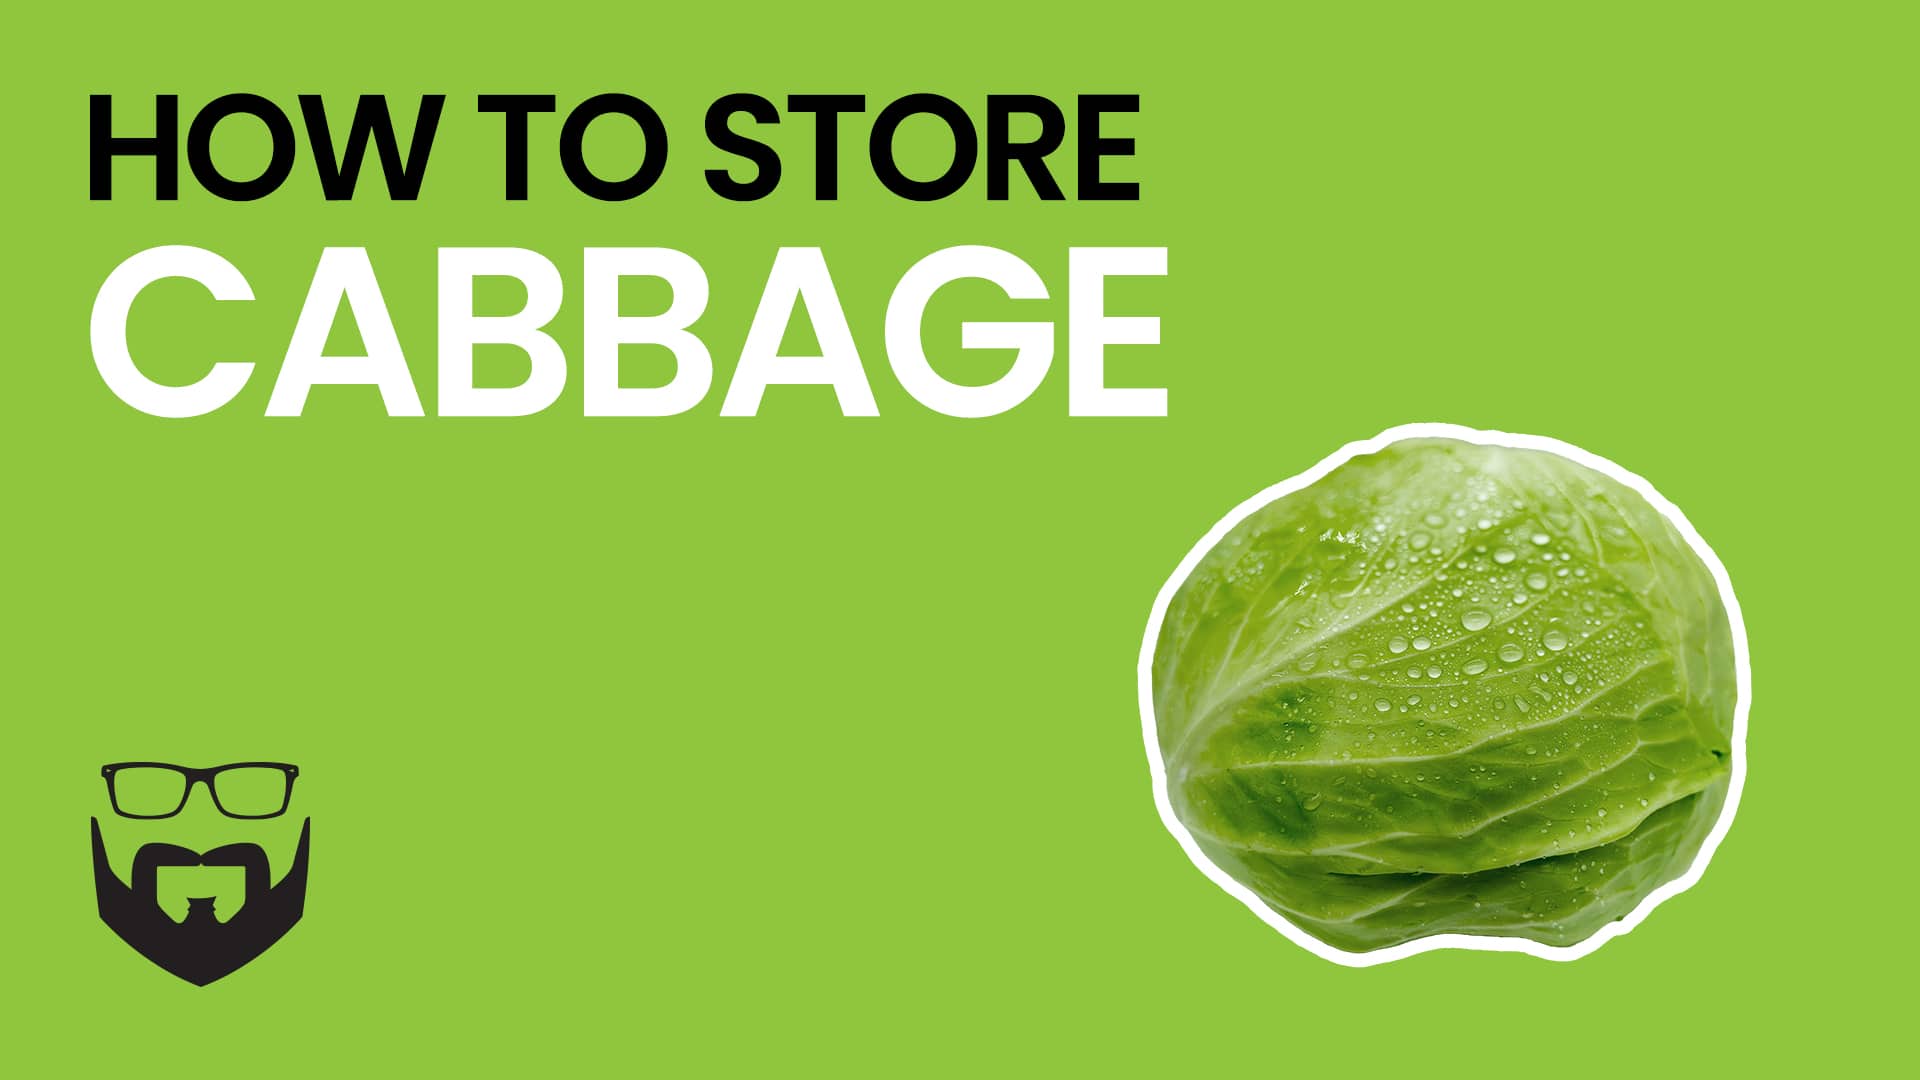 How to Store Cabbage Video - Green